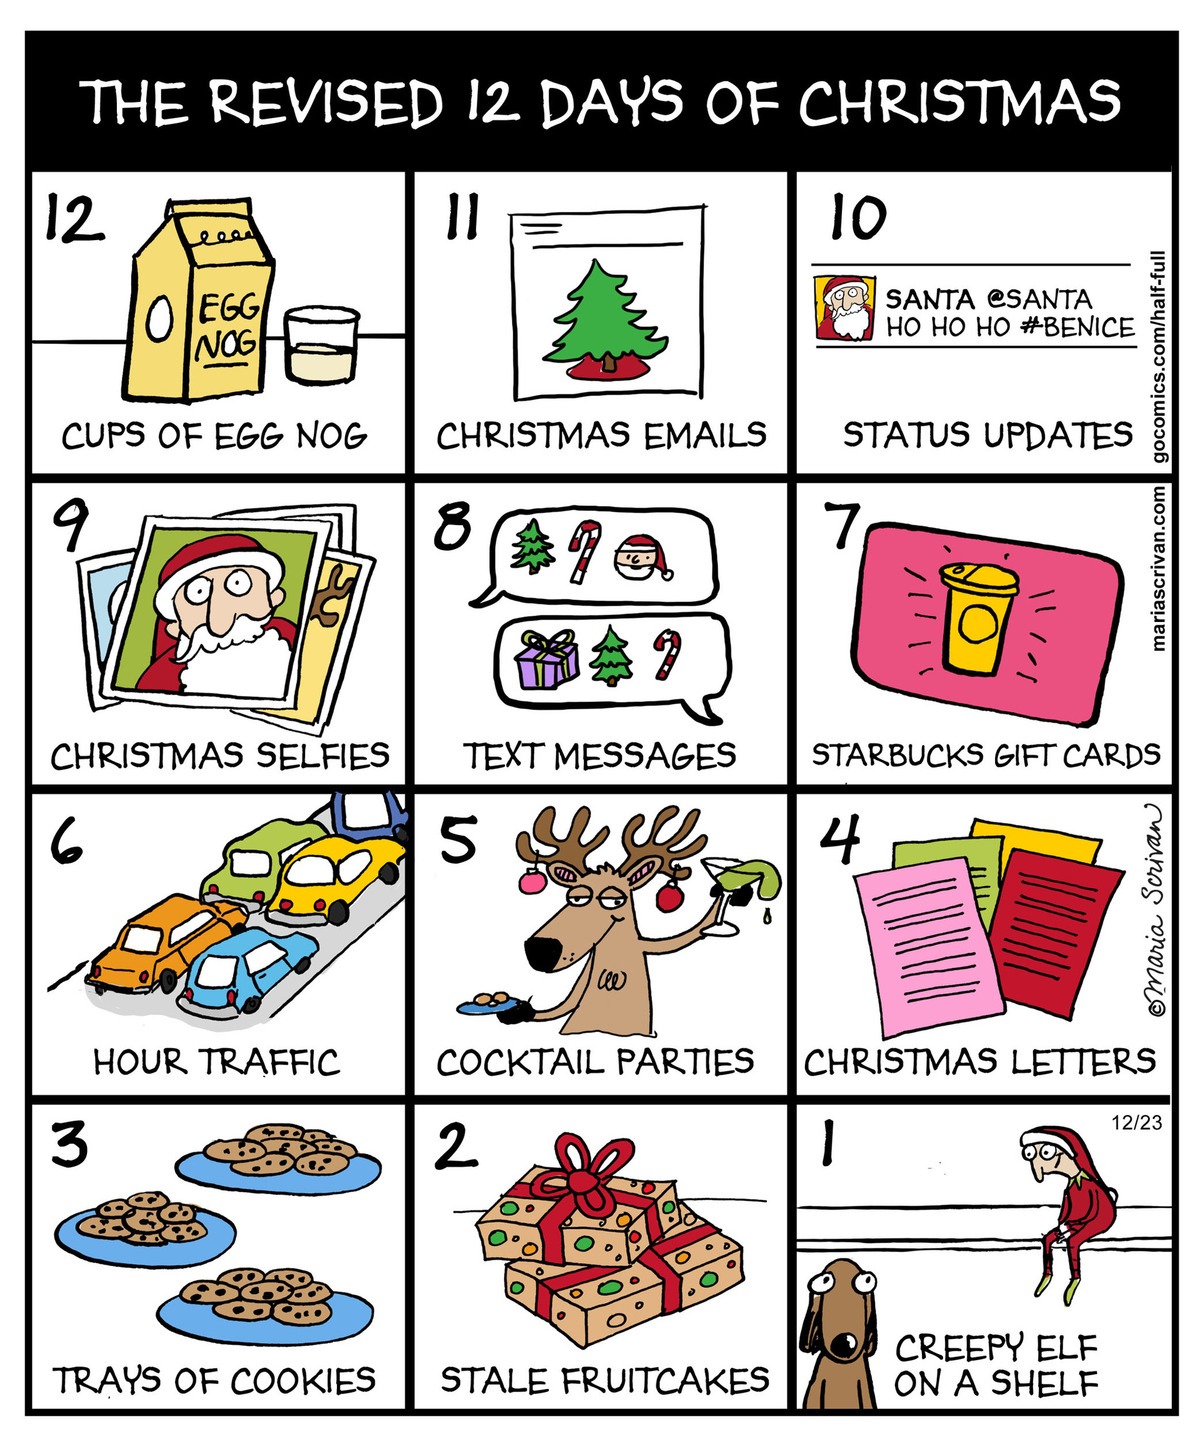 The 12 Days of Christmas Revised for the Modern Age